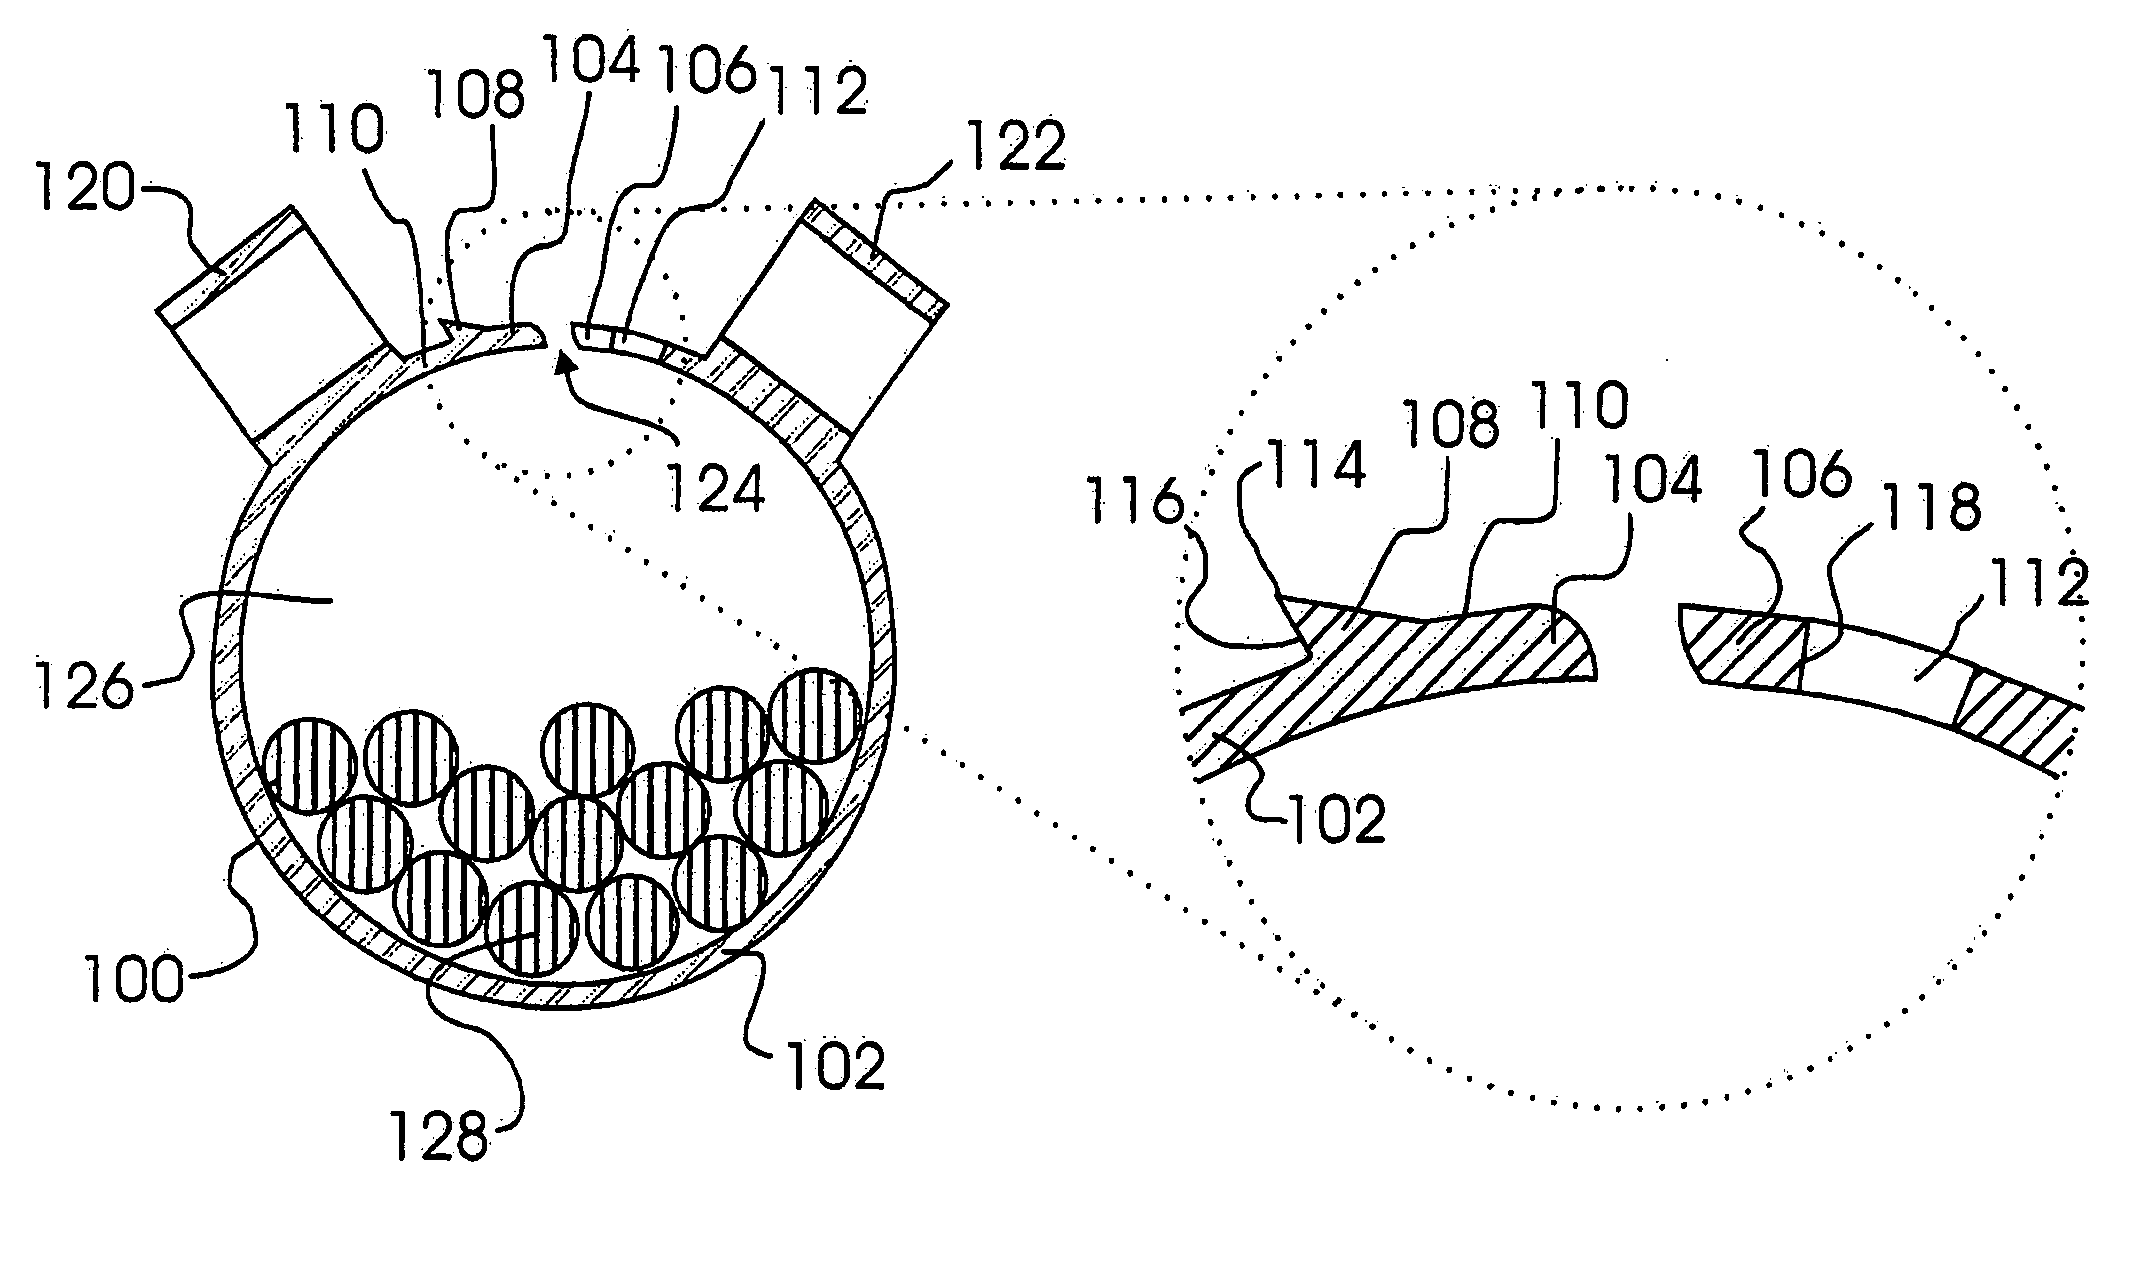 Single-handed cord/cable management device